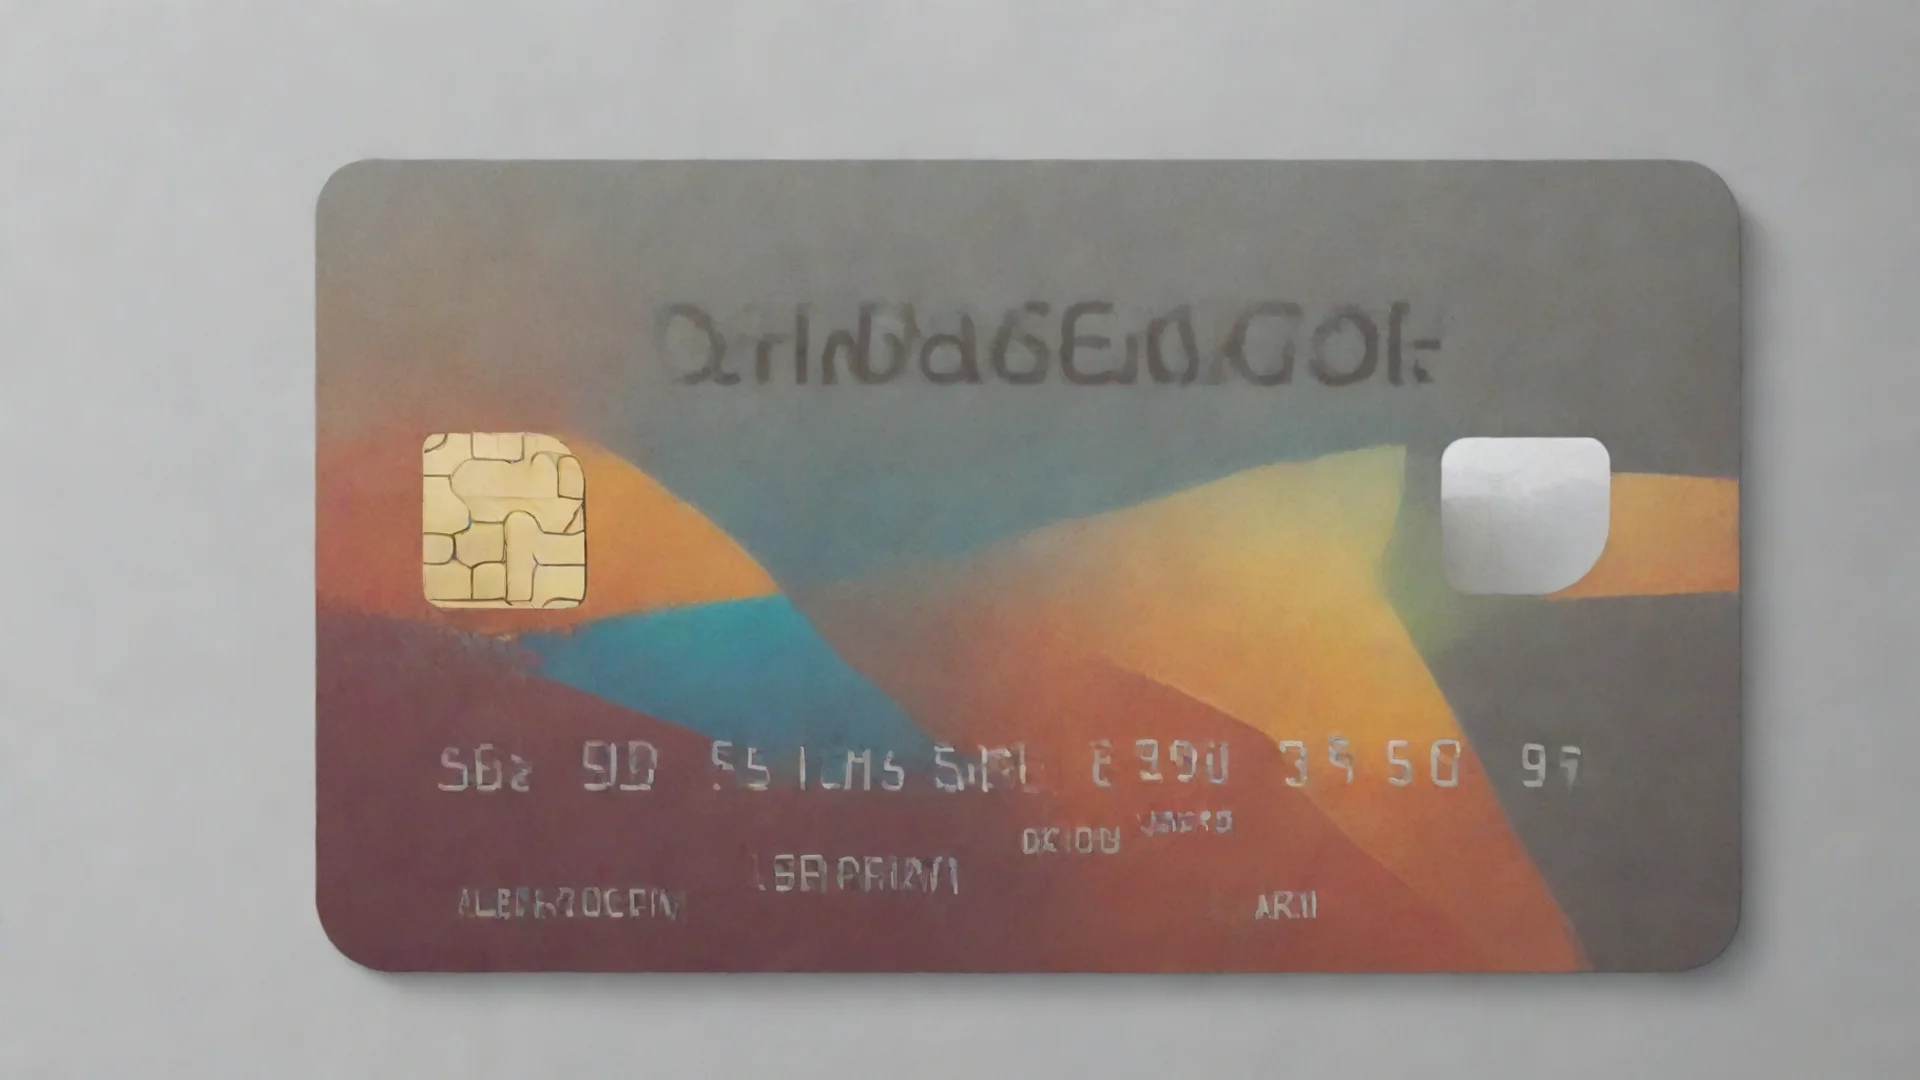 aitrending library card design for credit card good looking fantastic 1 wide